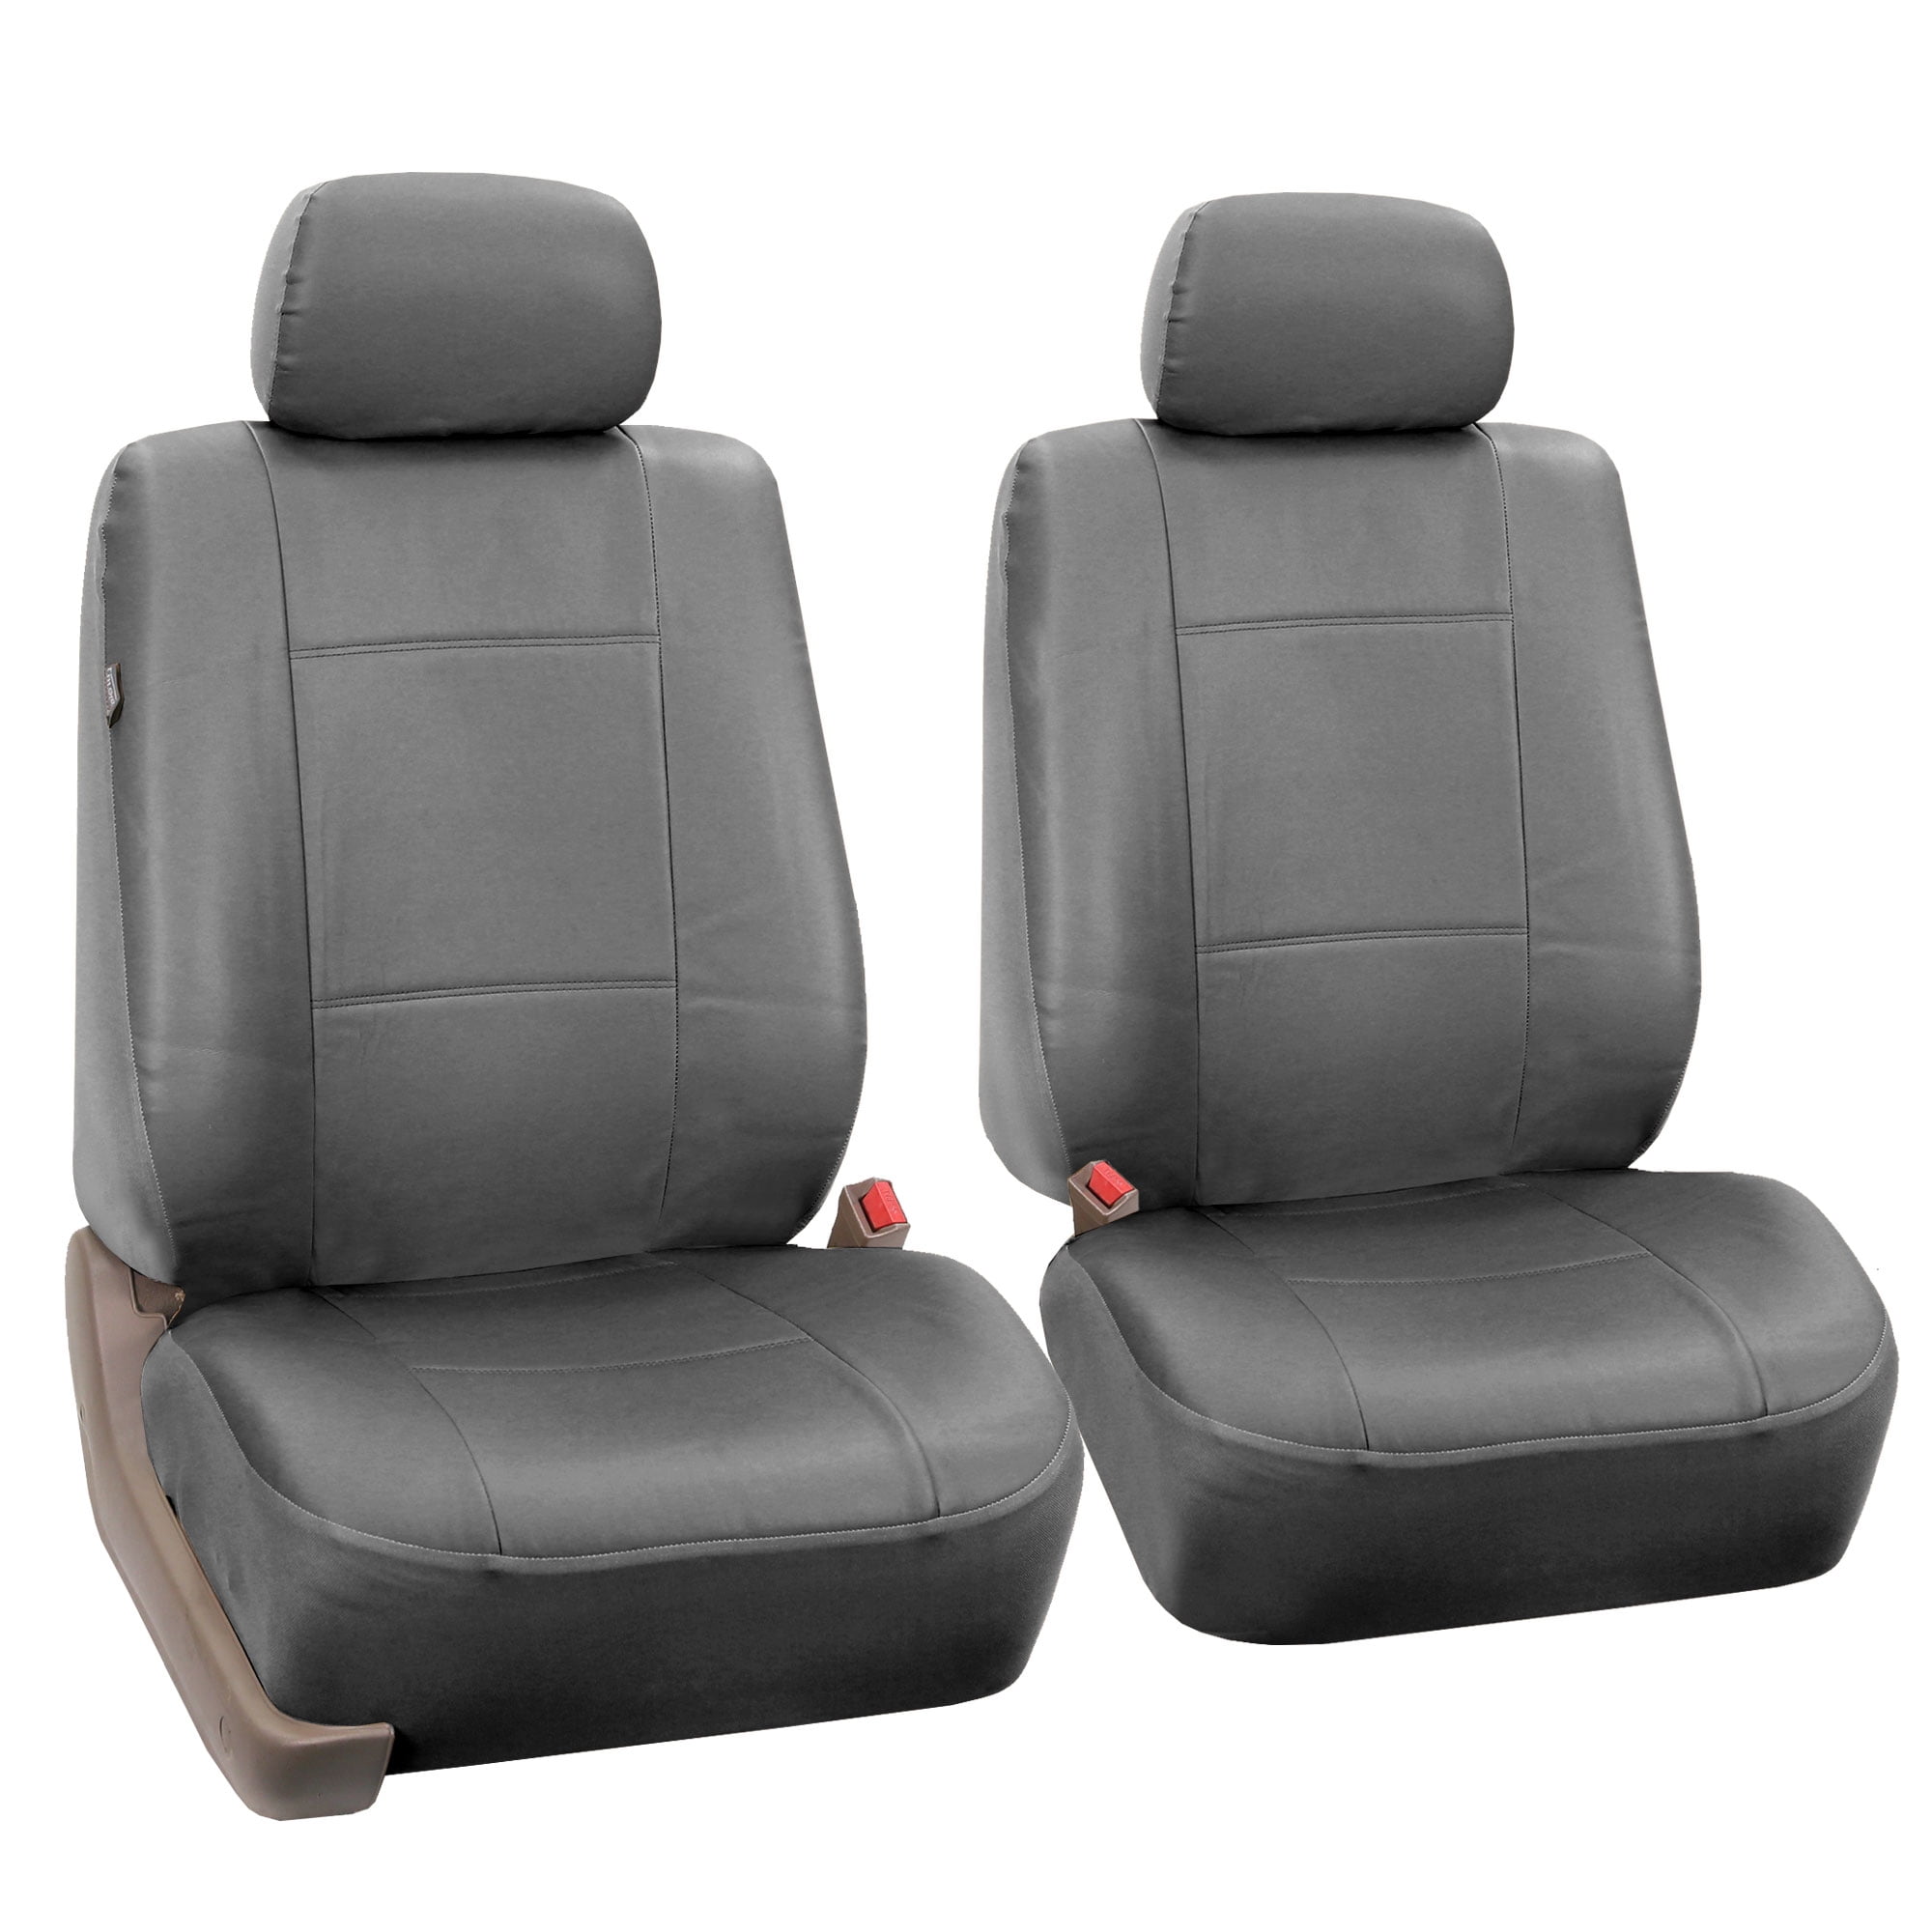 2XL-B Universal Car Seat Covers Set for VAUXHALL TIGRA A I B II faux leather 